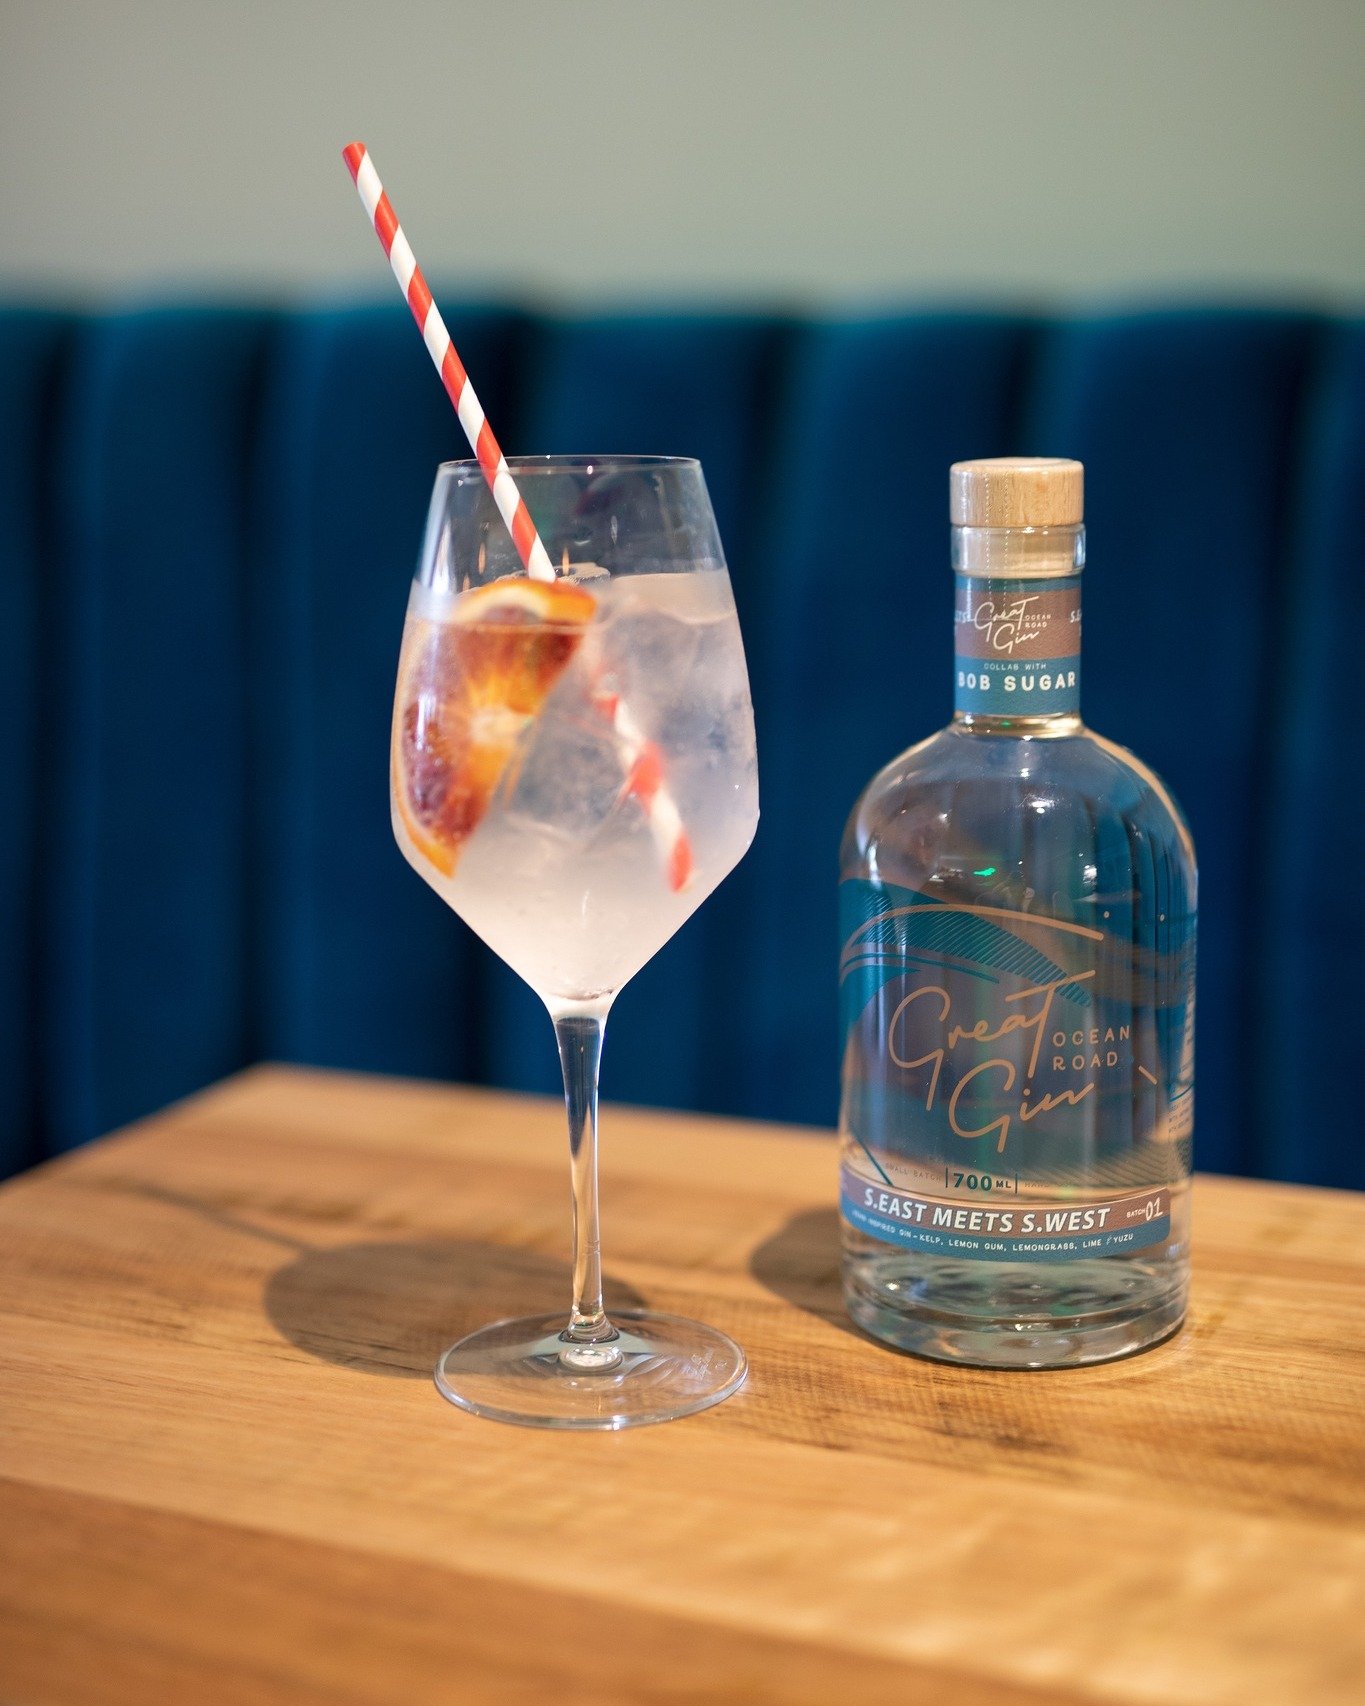 South East Meets South West was developed with our South East Asian-inspired Gin Kitchen menu in mind. This gin draws on local, coastal botanicals, including Kelp, Pig Face, and Lemon Gum, combined with the tangy flavours of lime, lemongrass, and Yuz